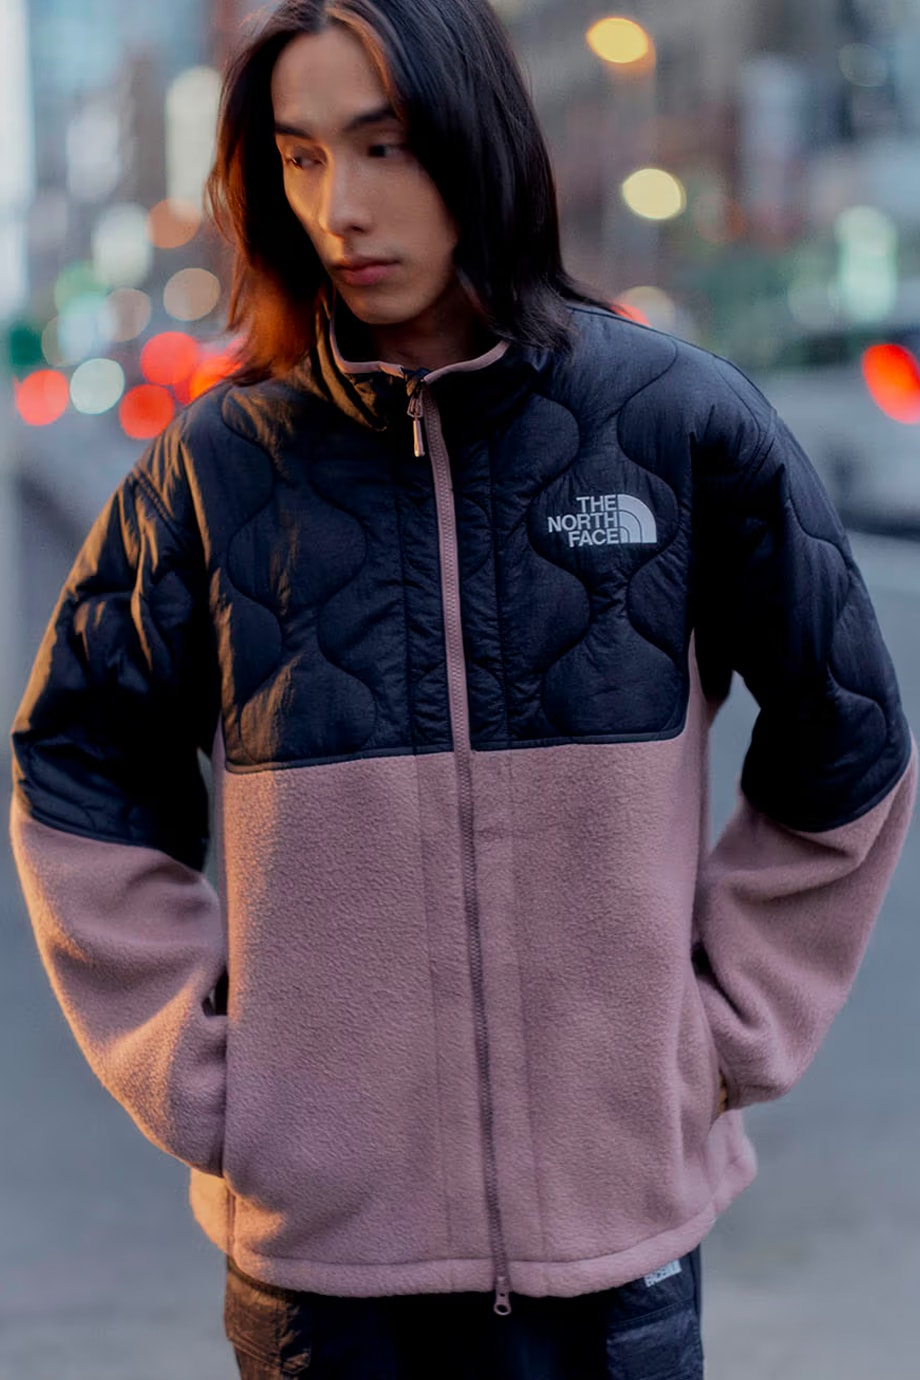 The North Face Urban Exploration Urban Texture Release Date